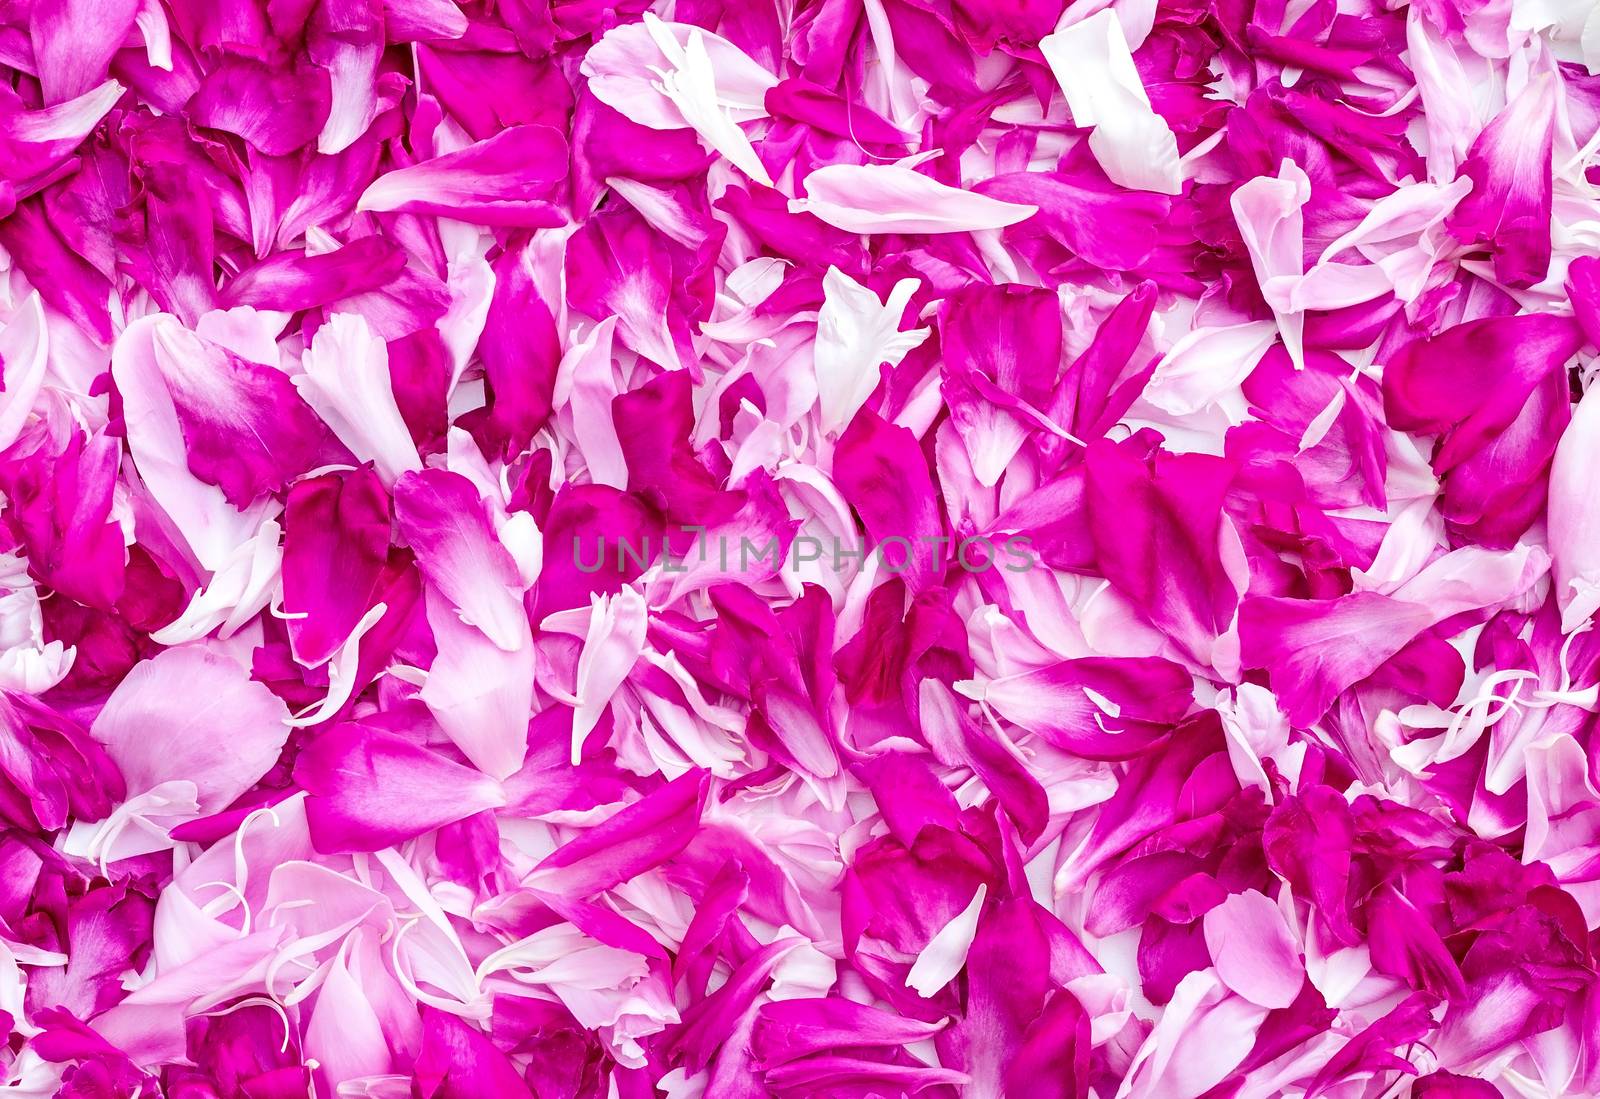 Large number of gentle white and bright pink petals of a peony. Background image.